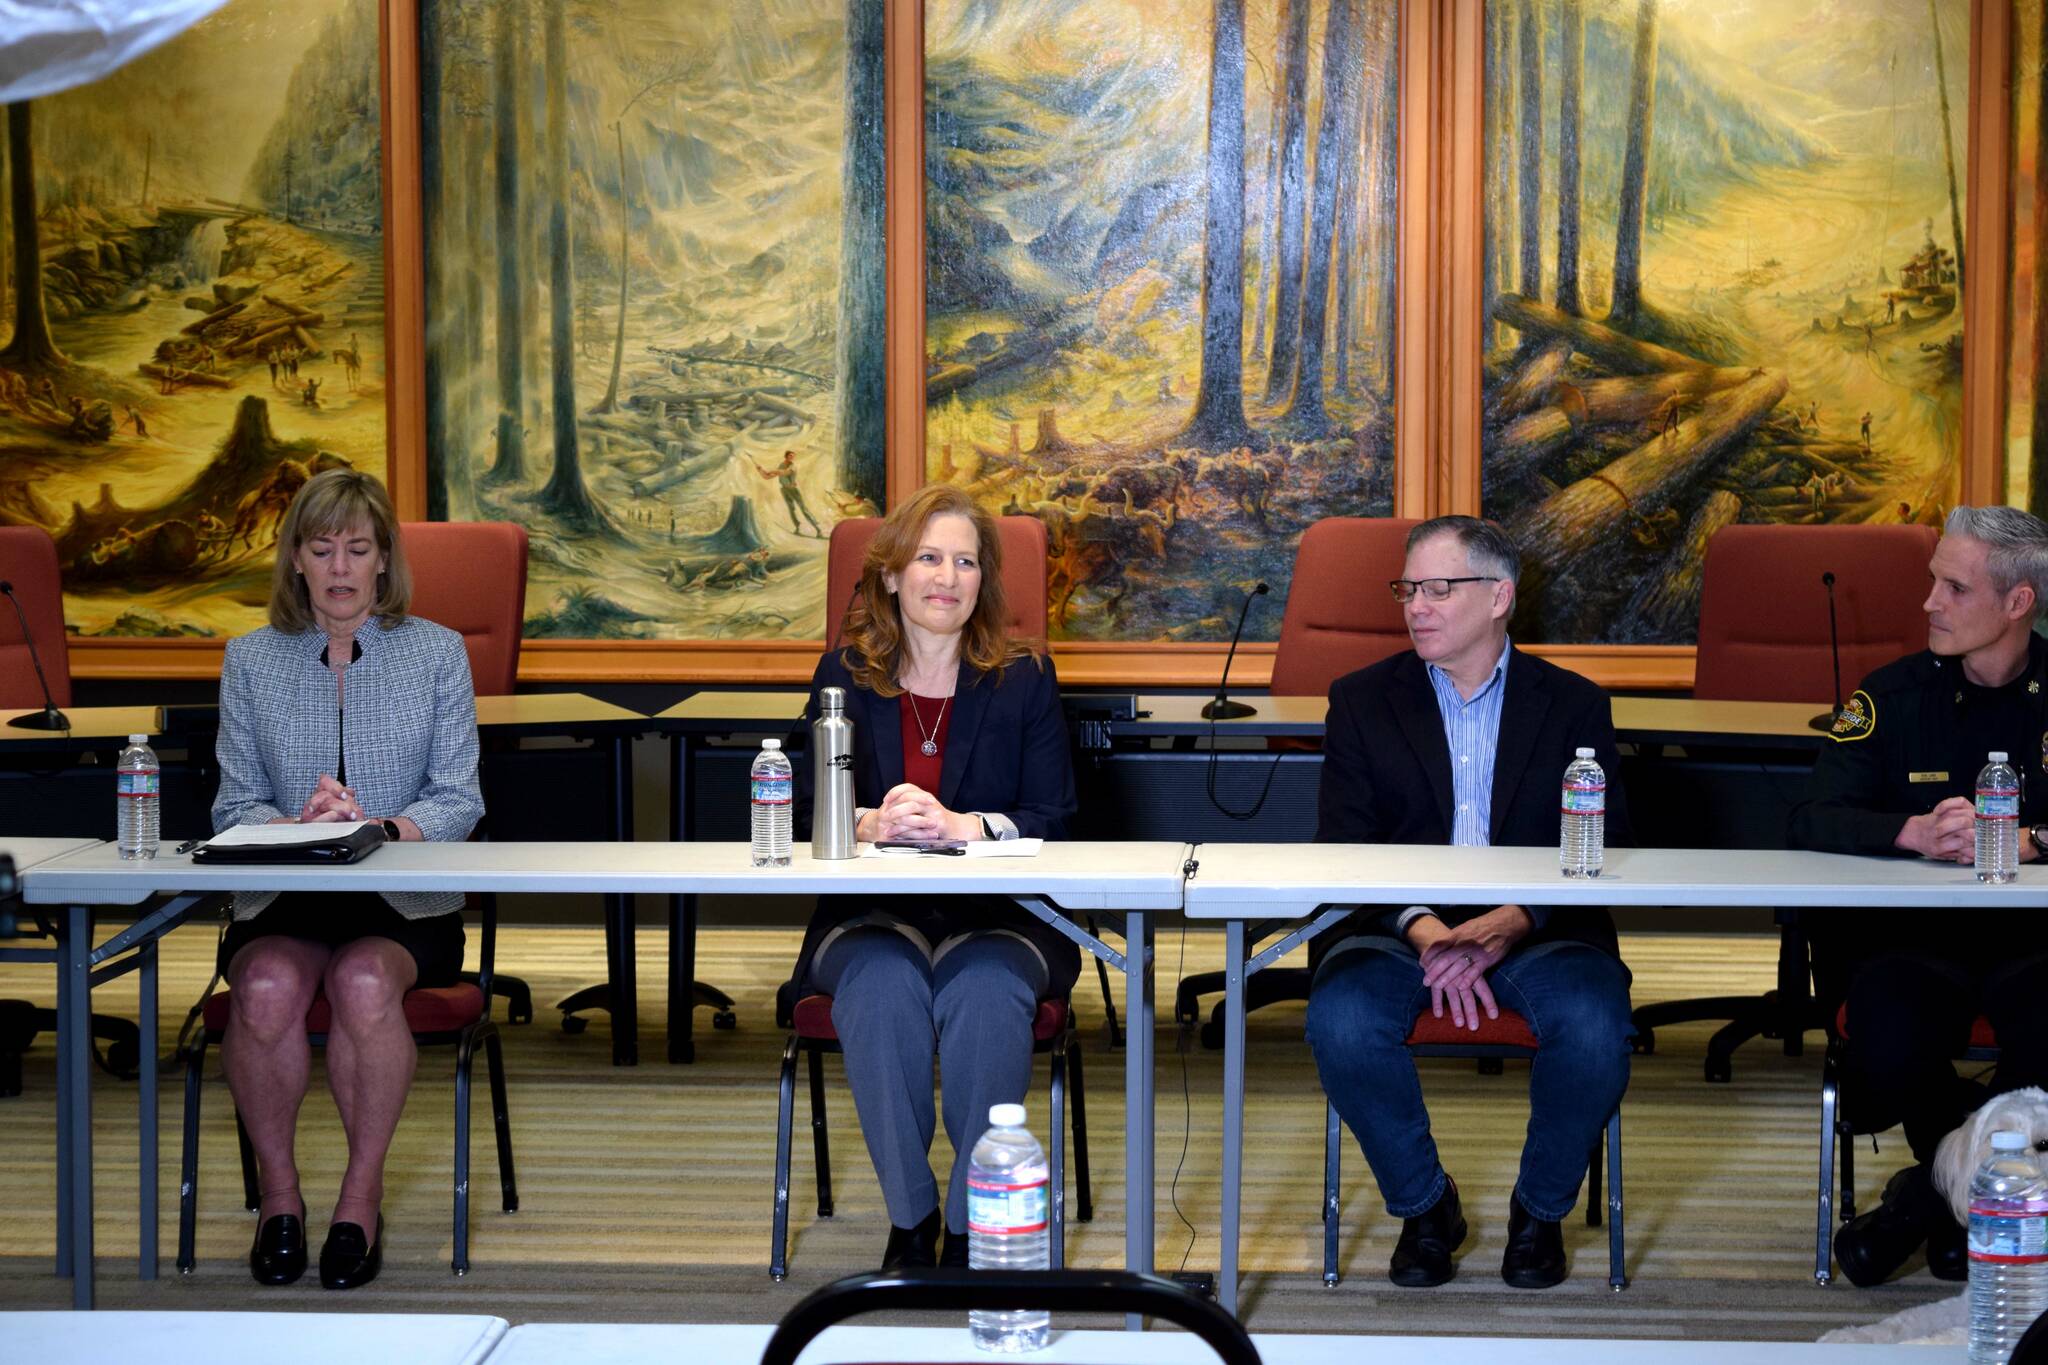 Federal, state and local leaders talk about State Route 18 at a roundtable discussion March 23 at Snoqualmie City Hall. From left: Snoqualmie Mayor Katherine Ross, U.S. Rep. Kim Schrier, State Rep. Bill Ramos, Eastside Fire Rescue Assistant Chief Ben Lane. Photo by Conor Wilson/Valley Record